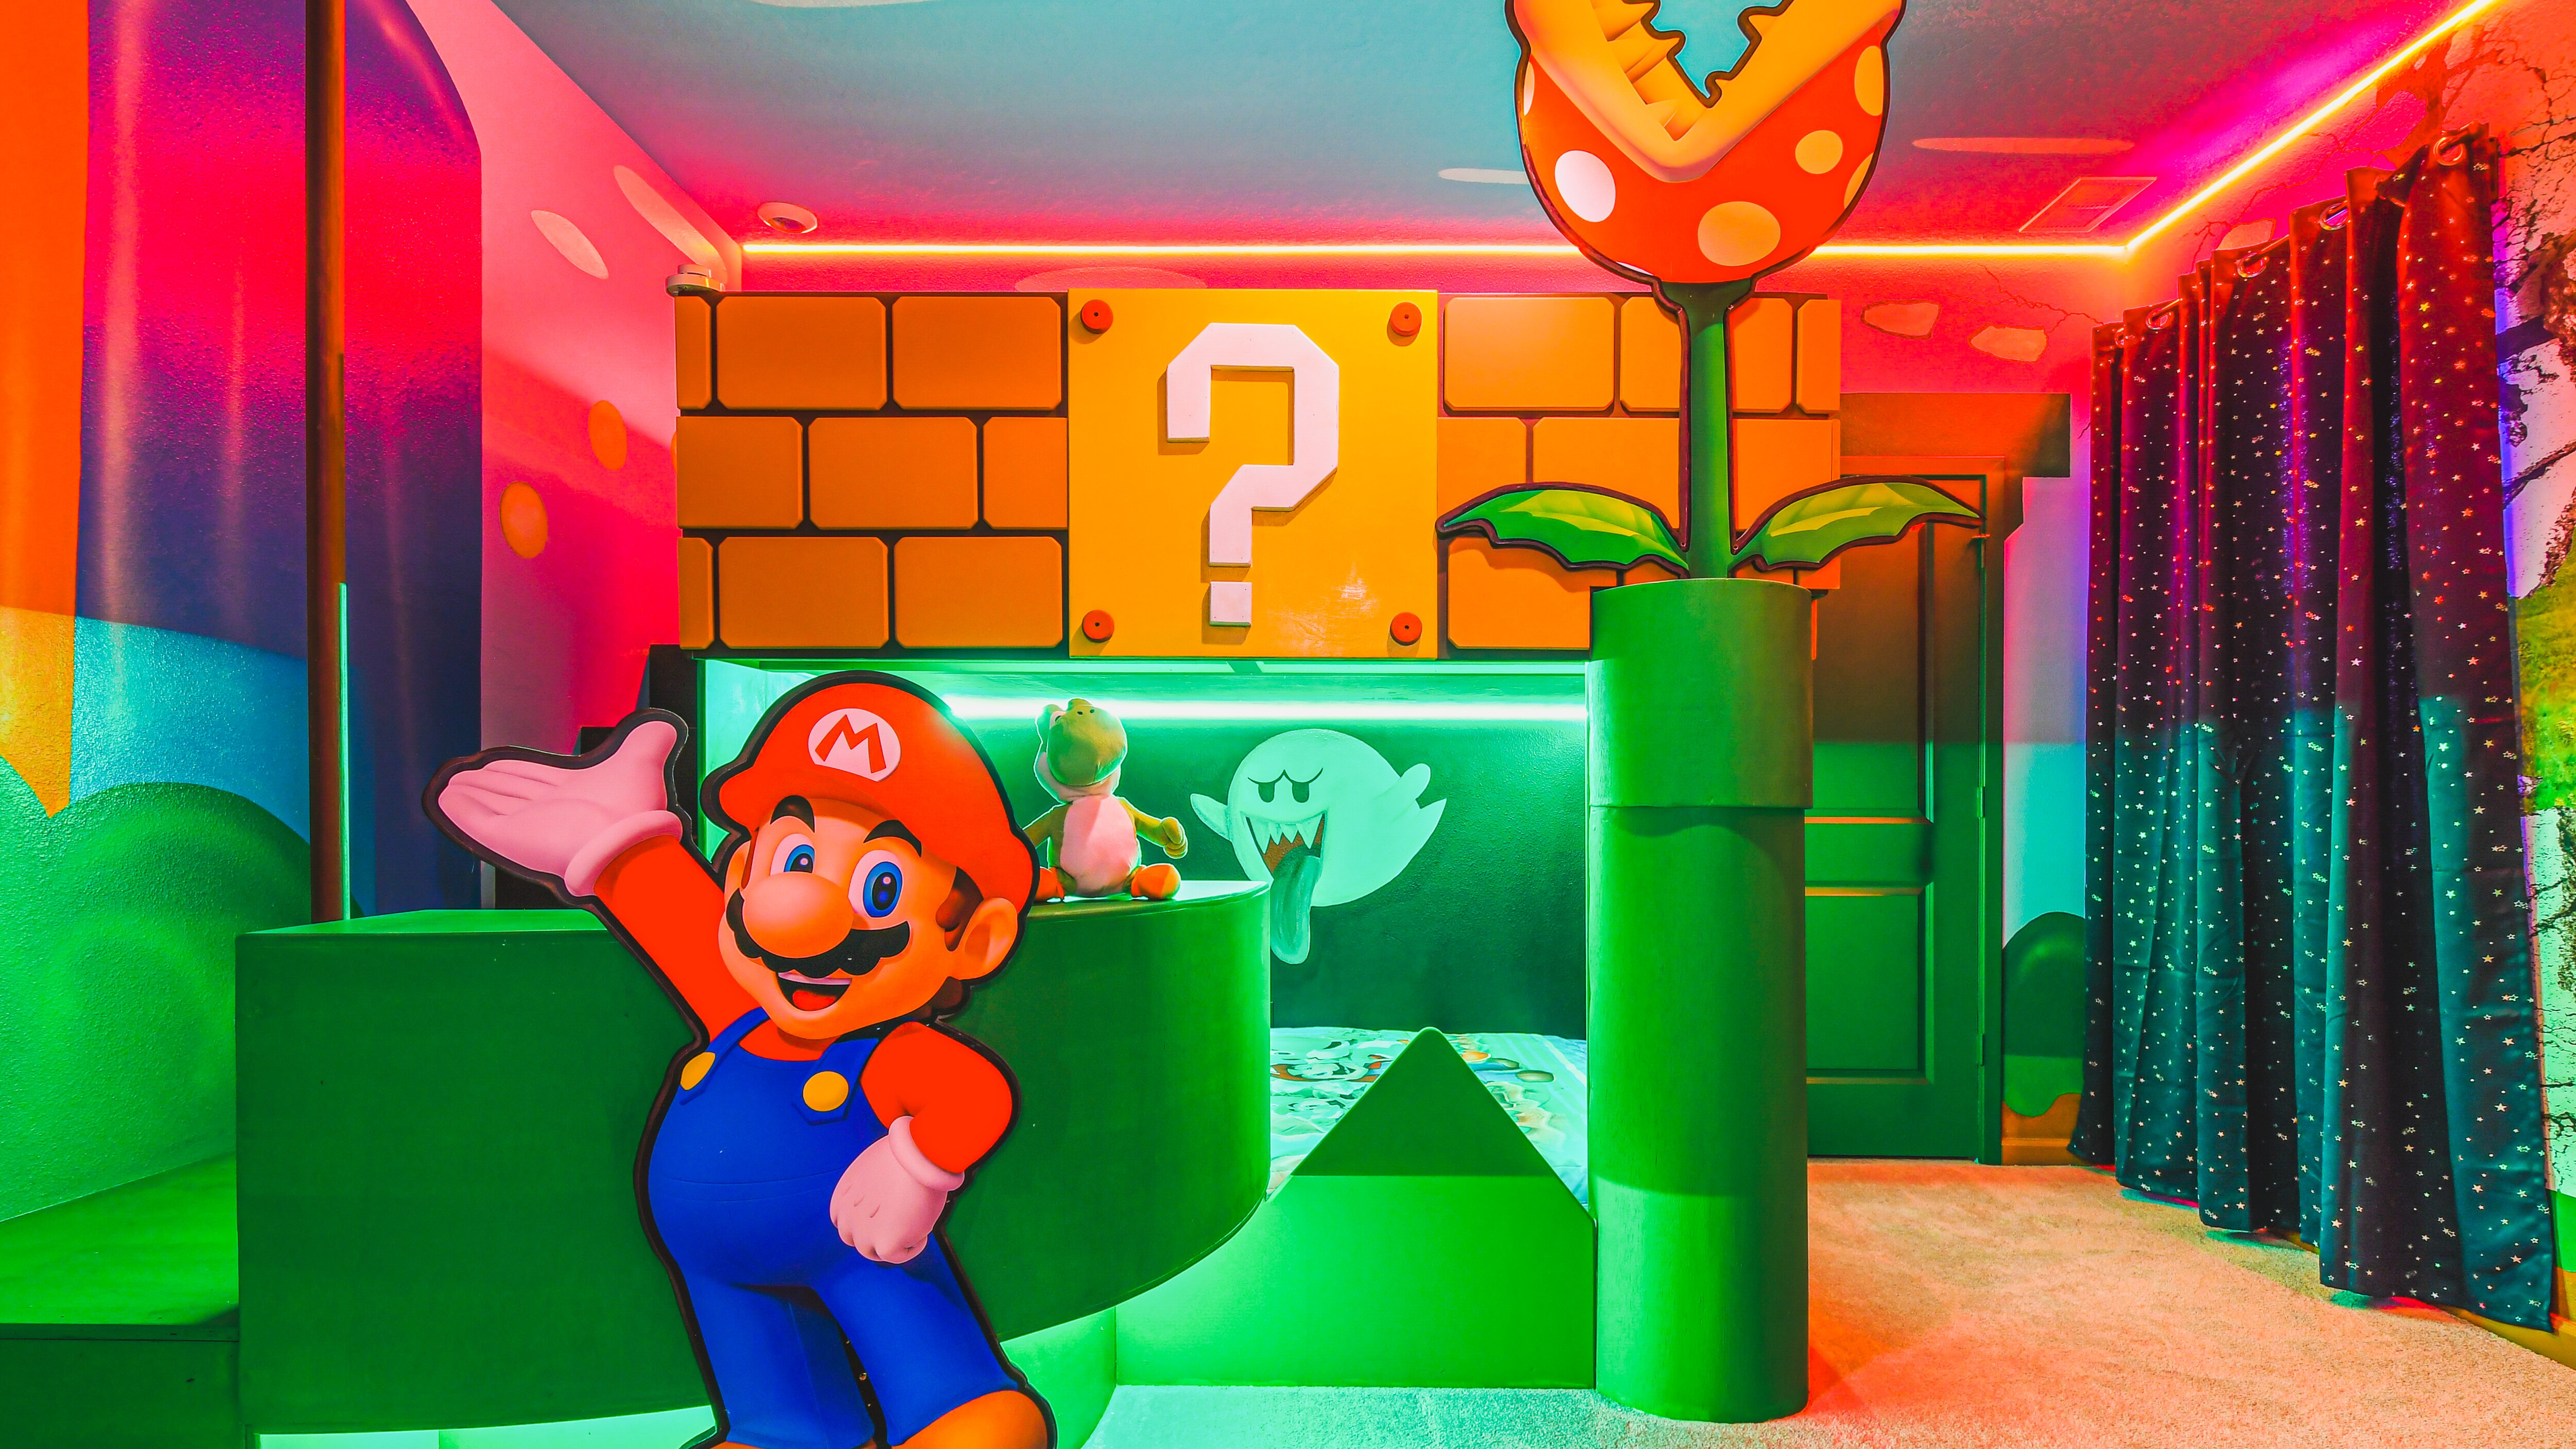 Kids will love the upstairs bedroom with a cool Mario theme